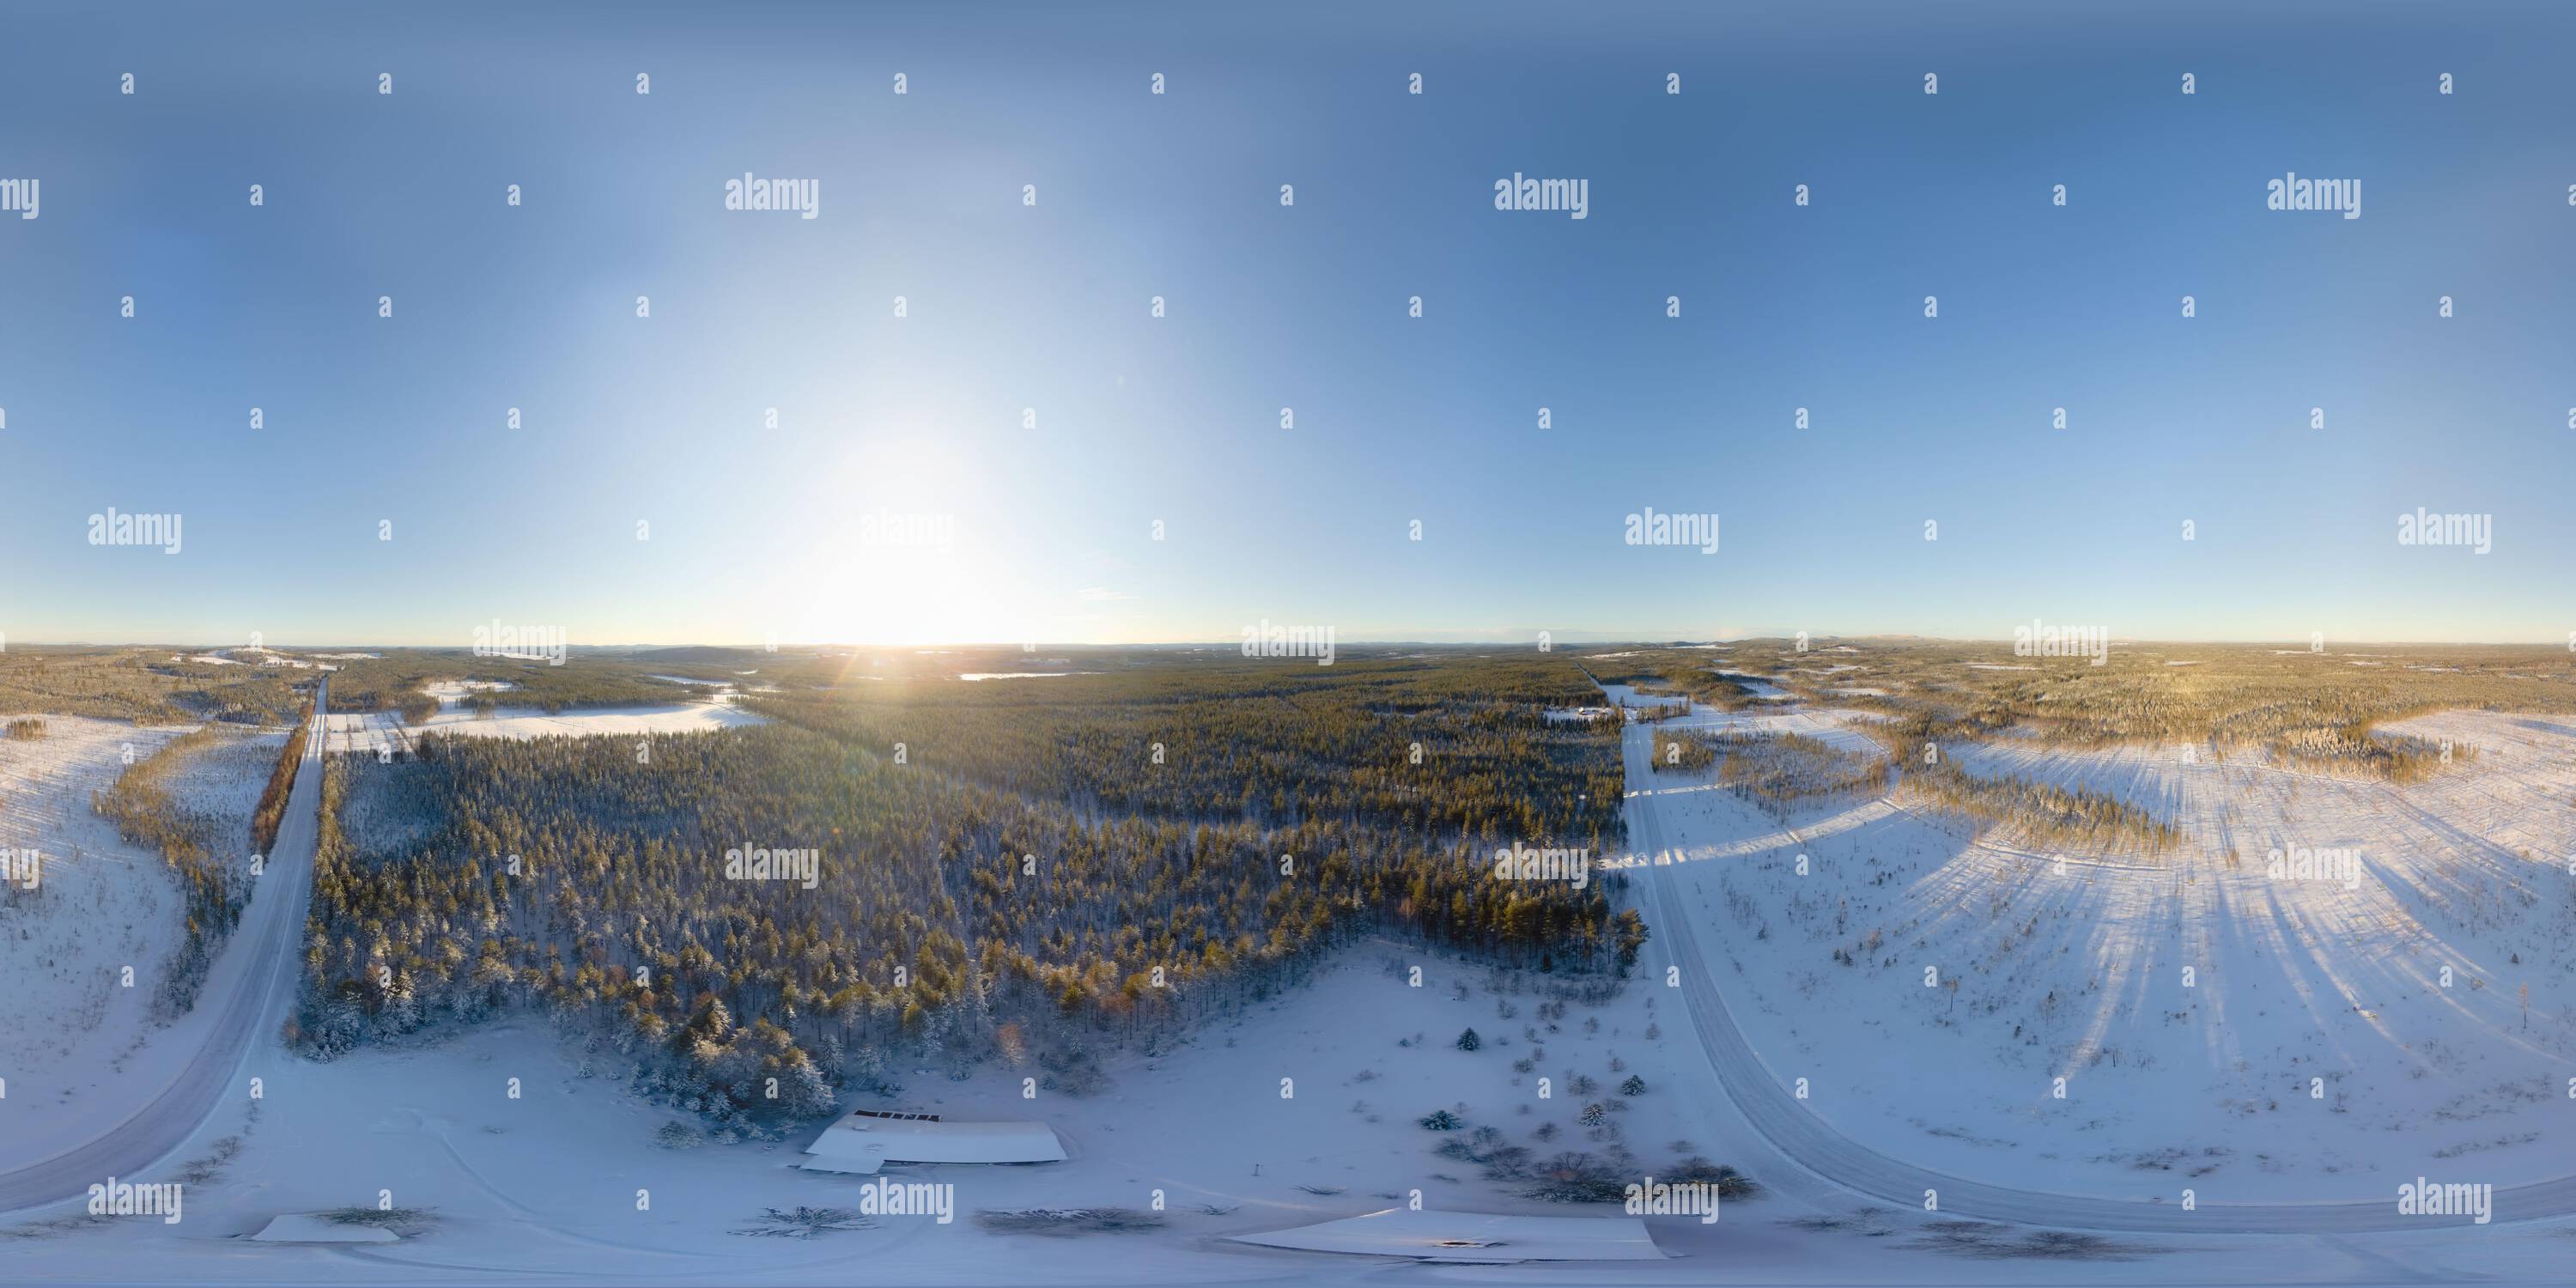 360 degree panoramic view of Spherical panorama of snowy Lapland landscape. Equirectangular projection makes the image usable in most spherical panorama viewers.